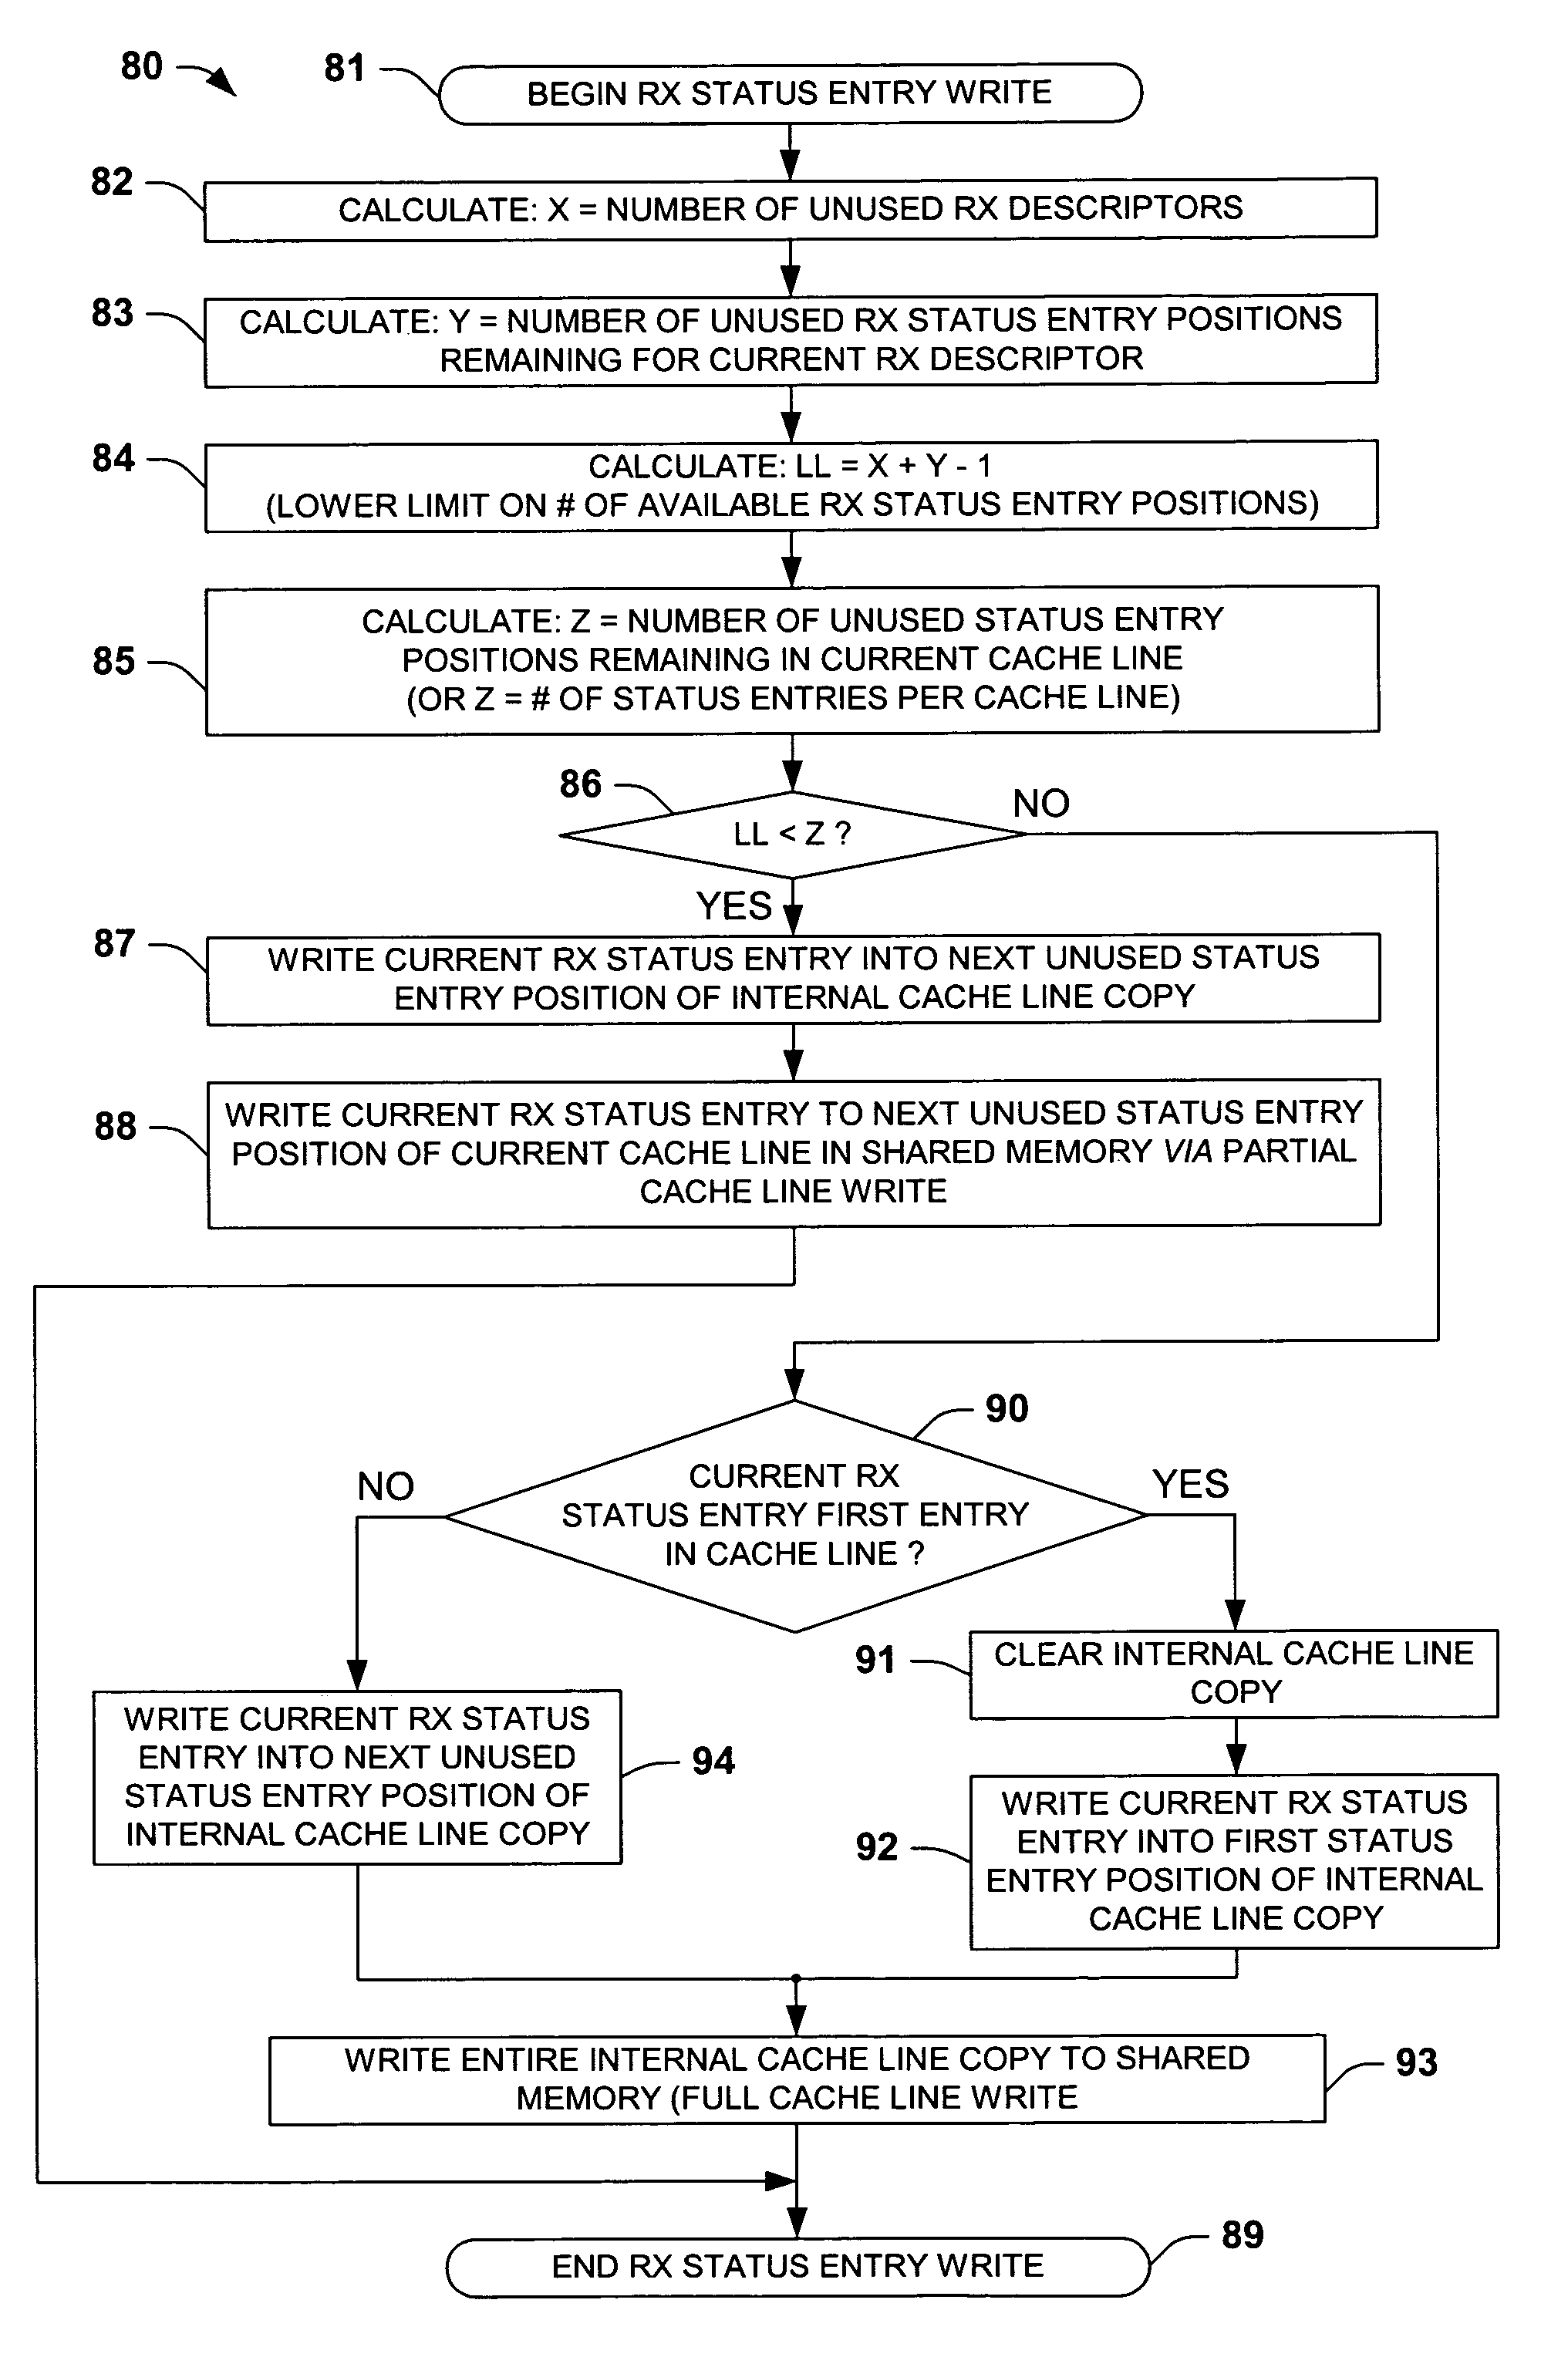 Peripheral devices and methods for transferring incoming data status entries from a peripheral to a host